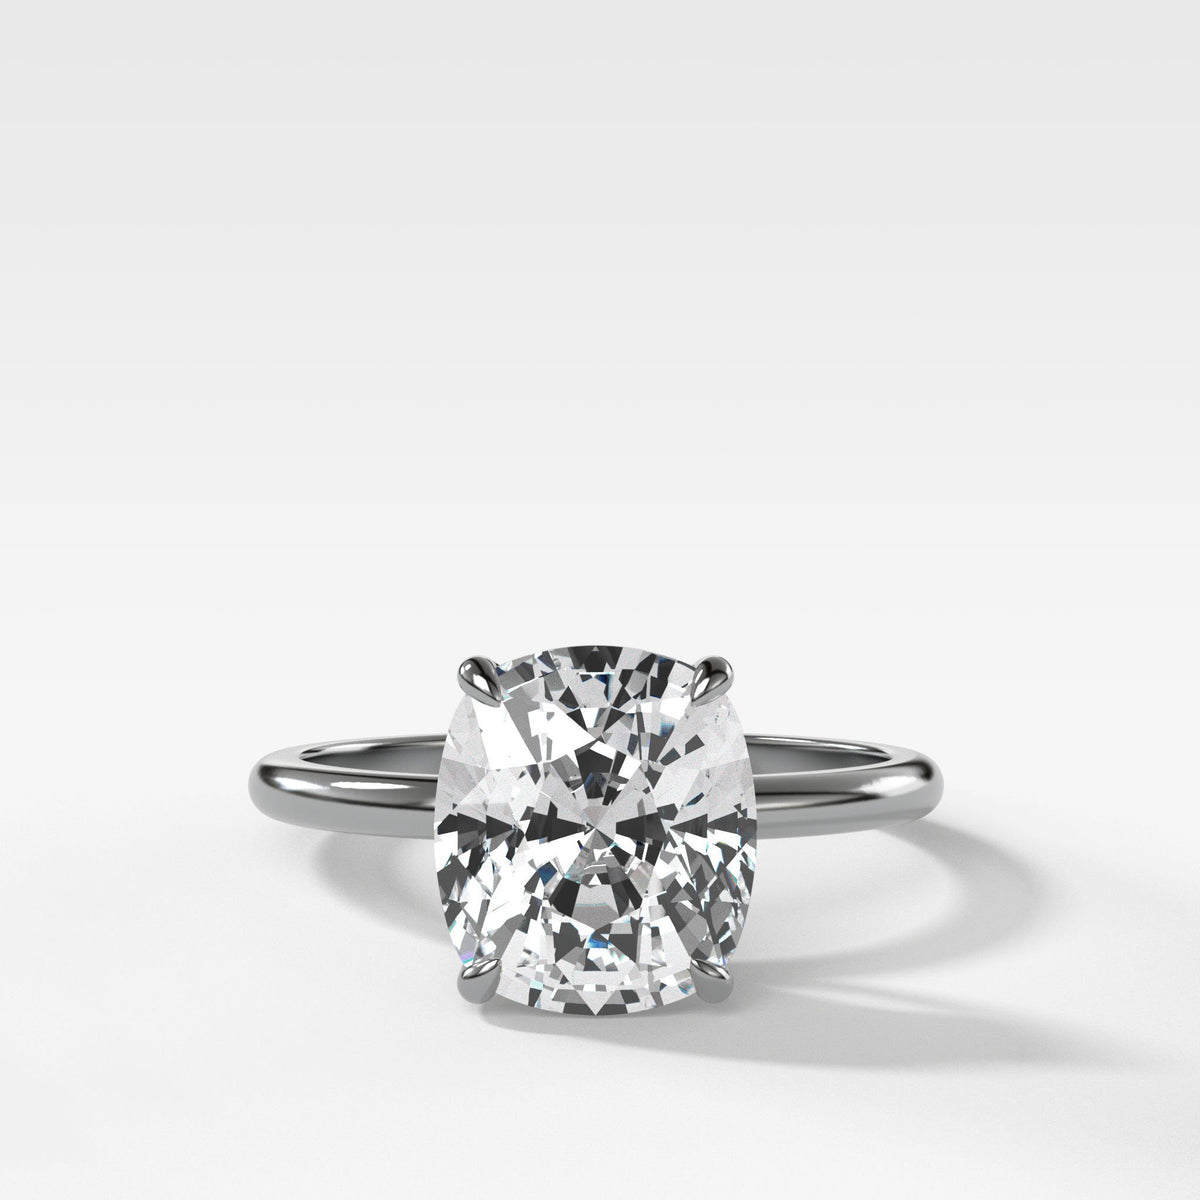 Thin + Simple Solitaire With 3.18Ct Elongated Cushion Cut by Good Stone in White Gold